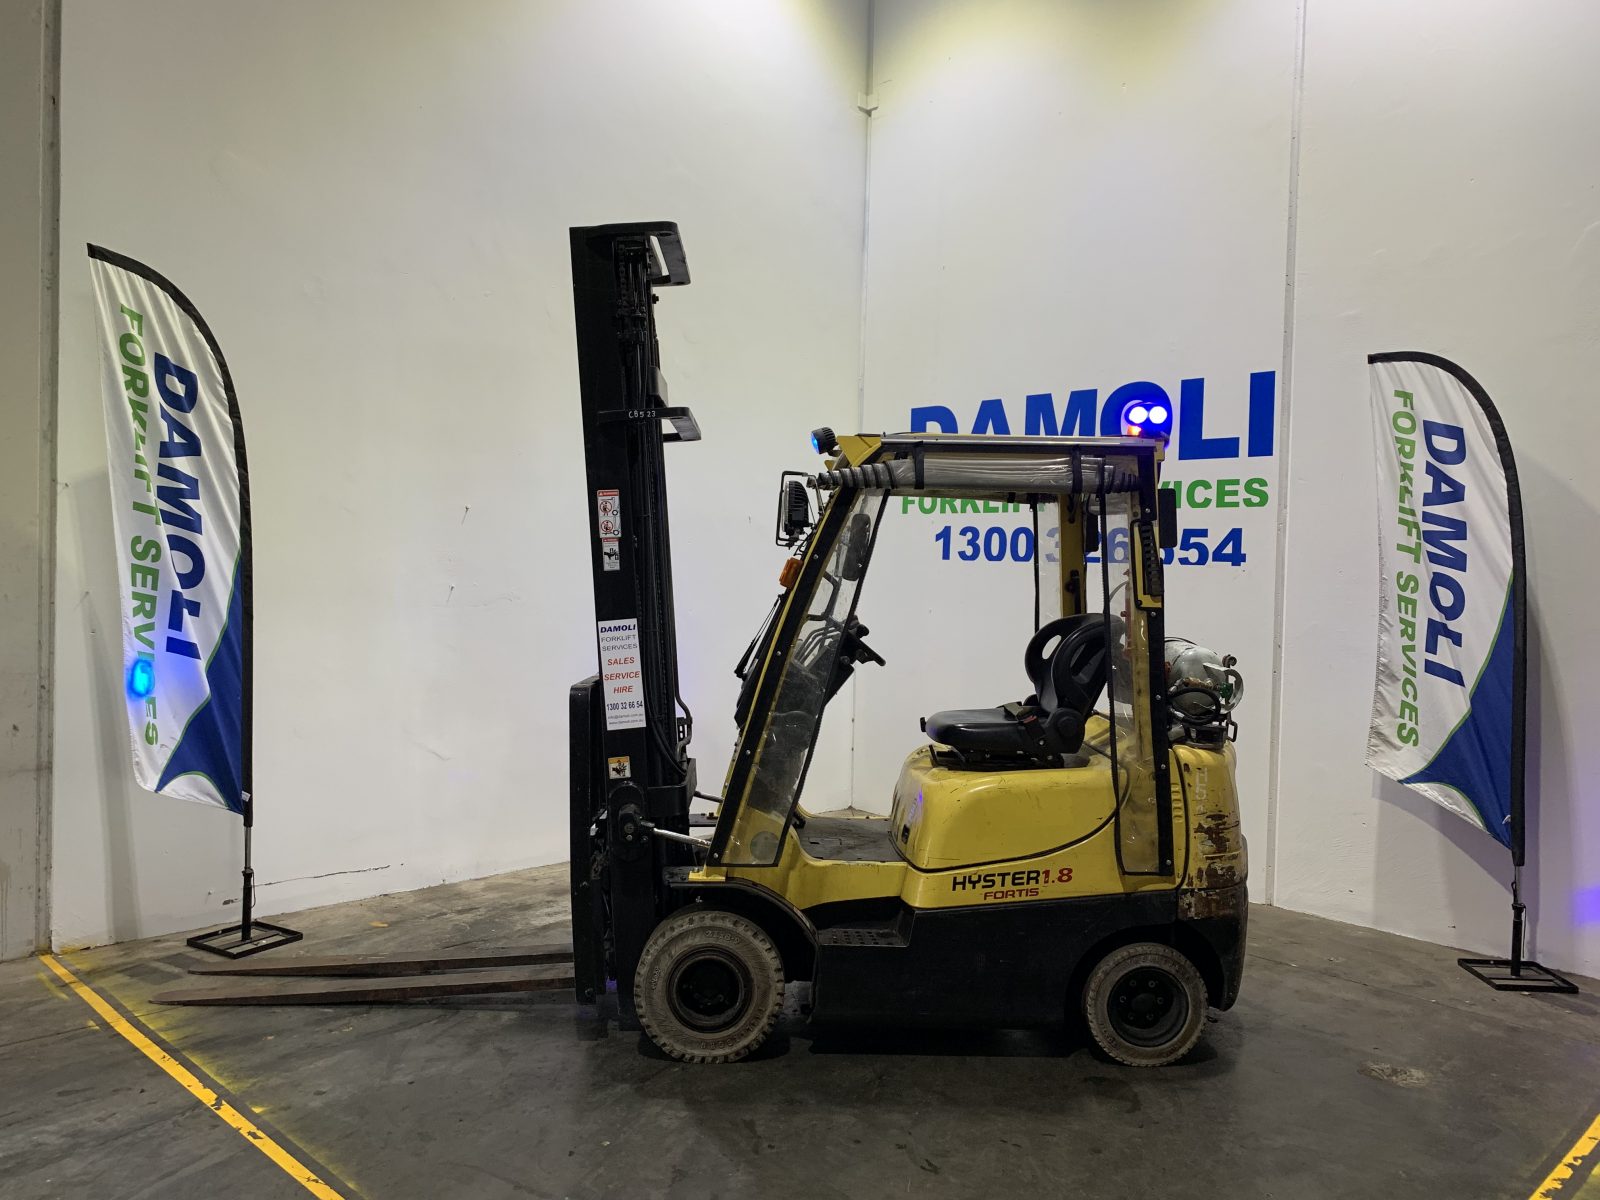 2 5 Tonne Hyster Tx Forklifts For Sale Damoli Group